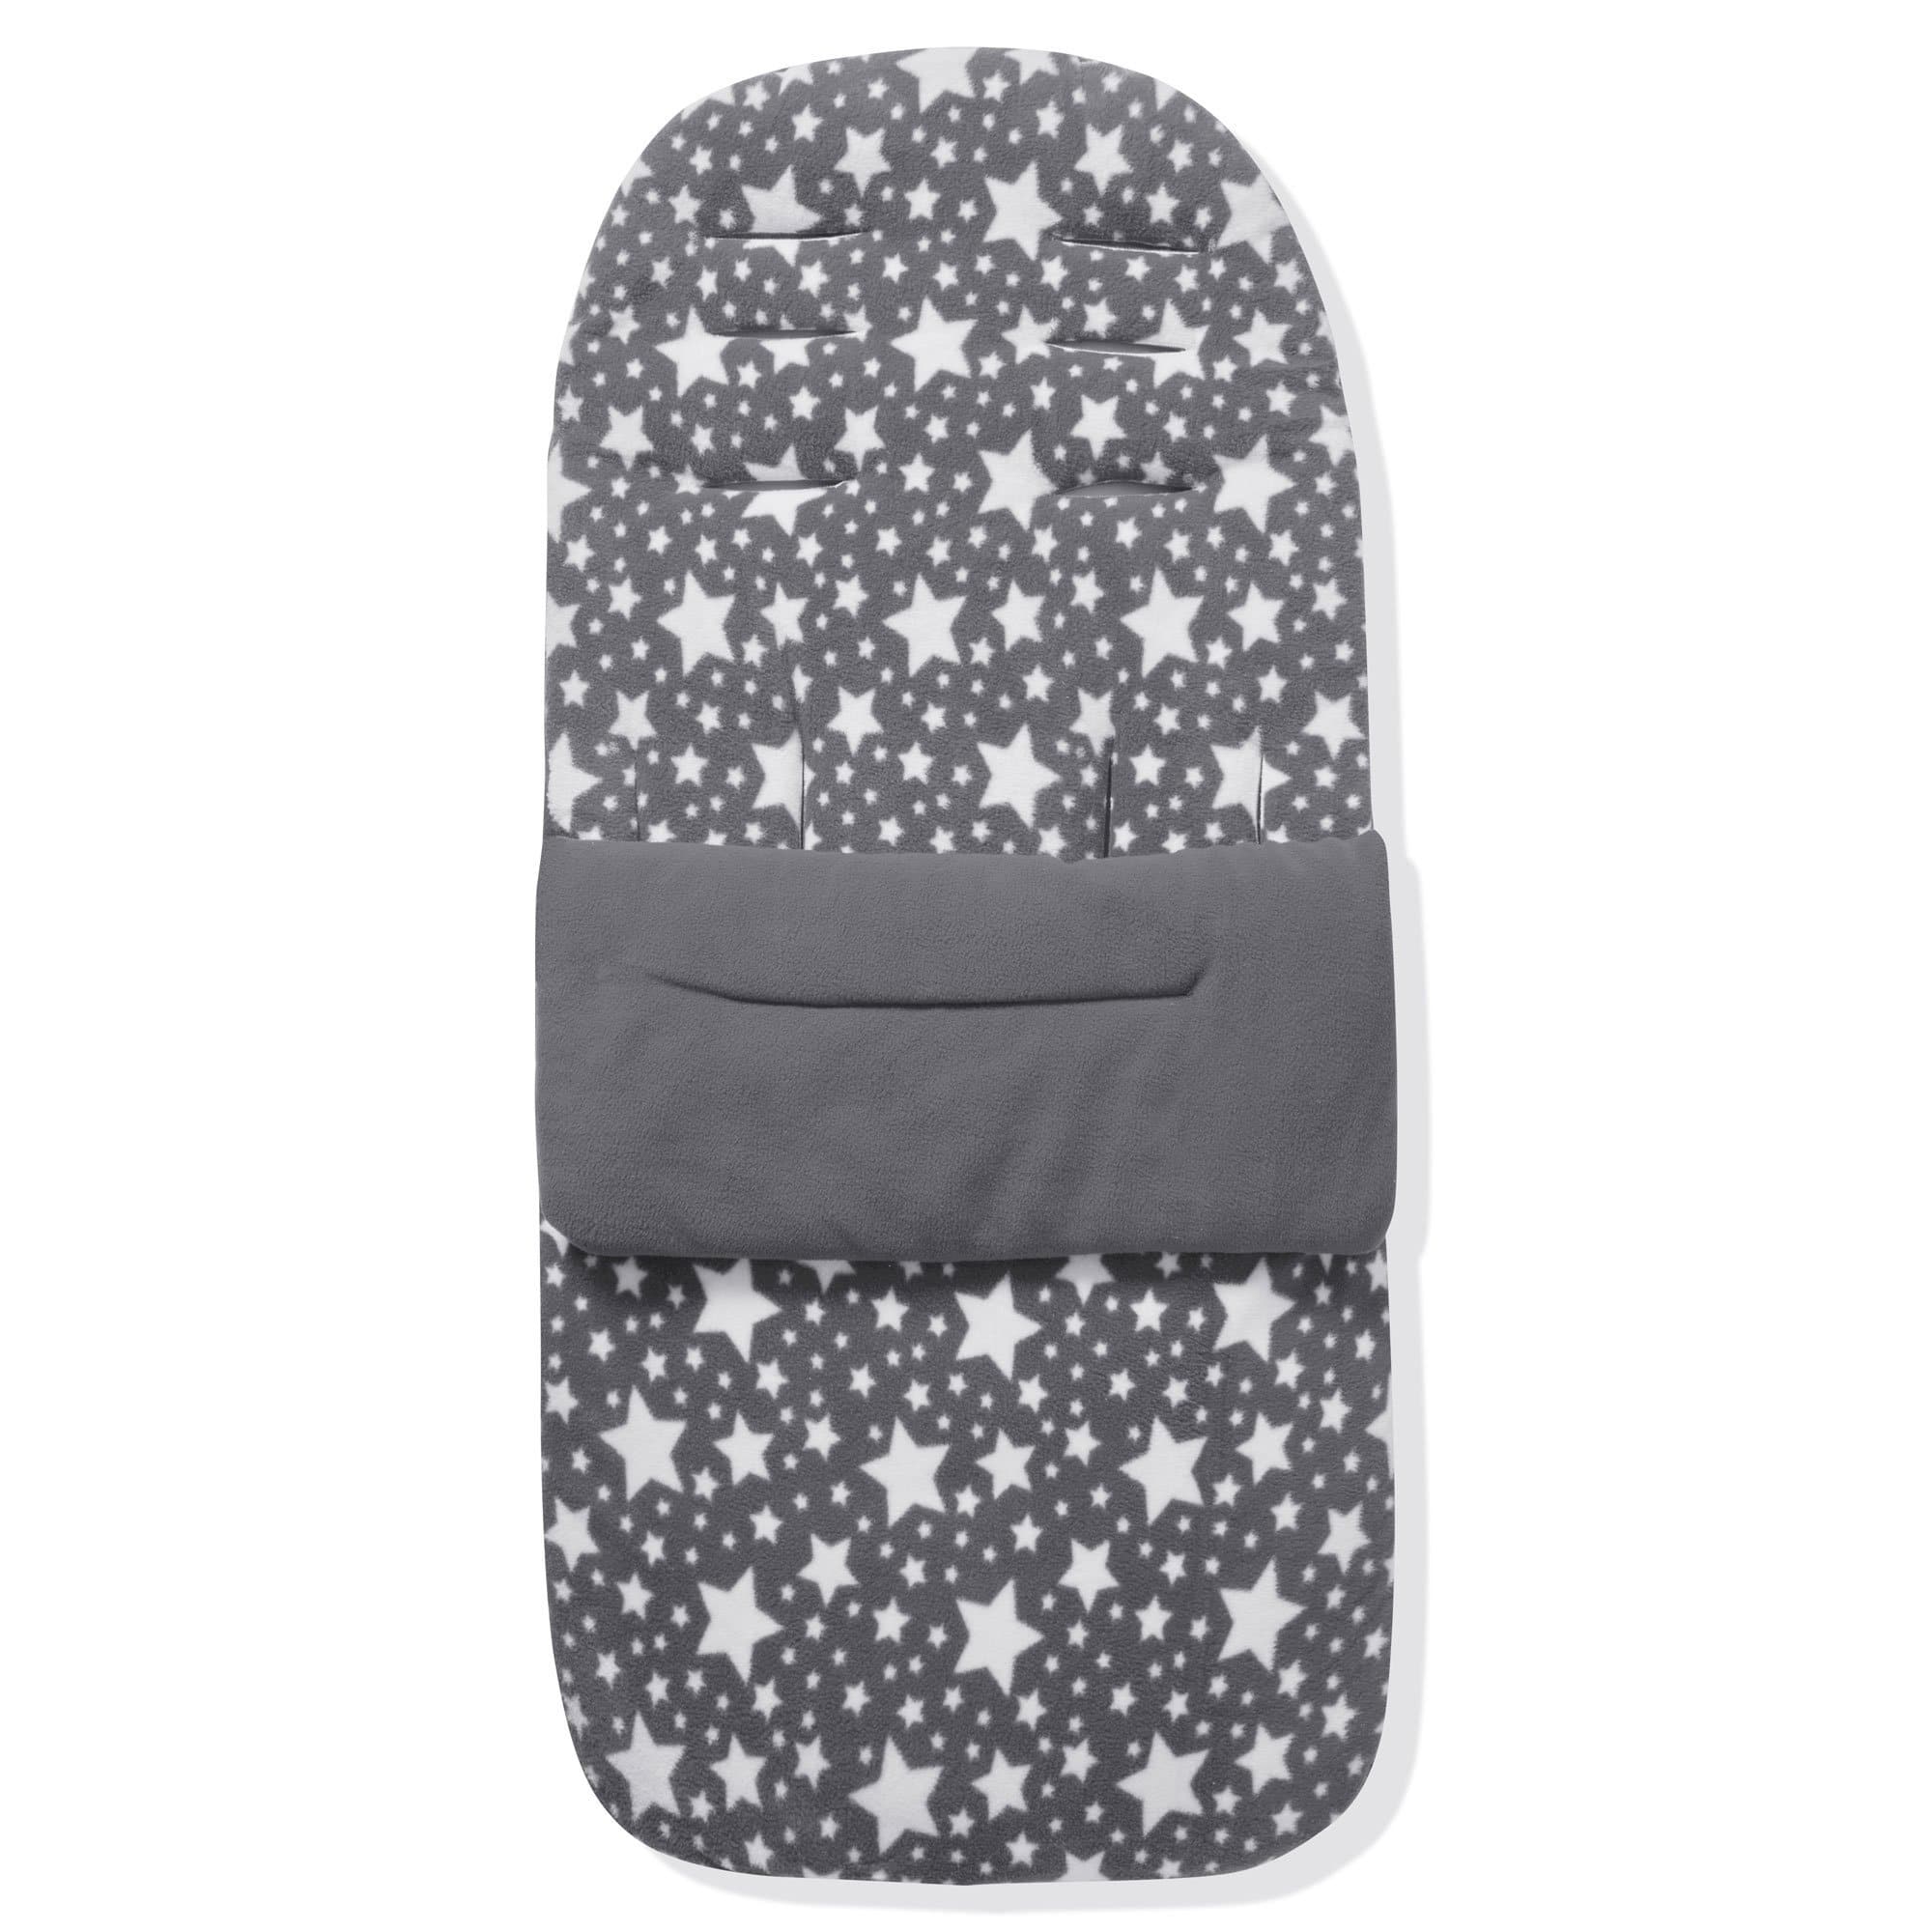 Fleece Footmuff / Cosy Toes Compatible with Excel - Grey Star / Fits All Models | For Your Little One